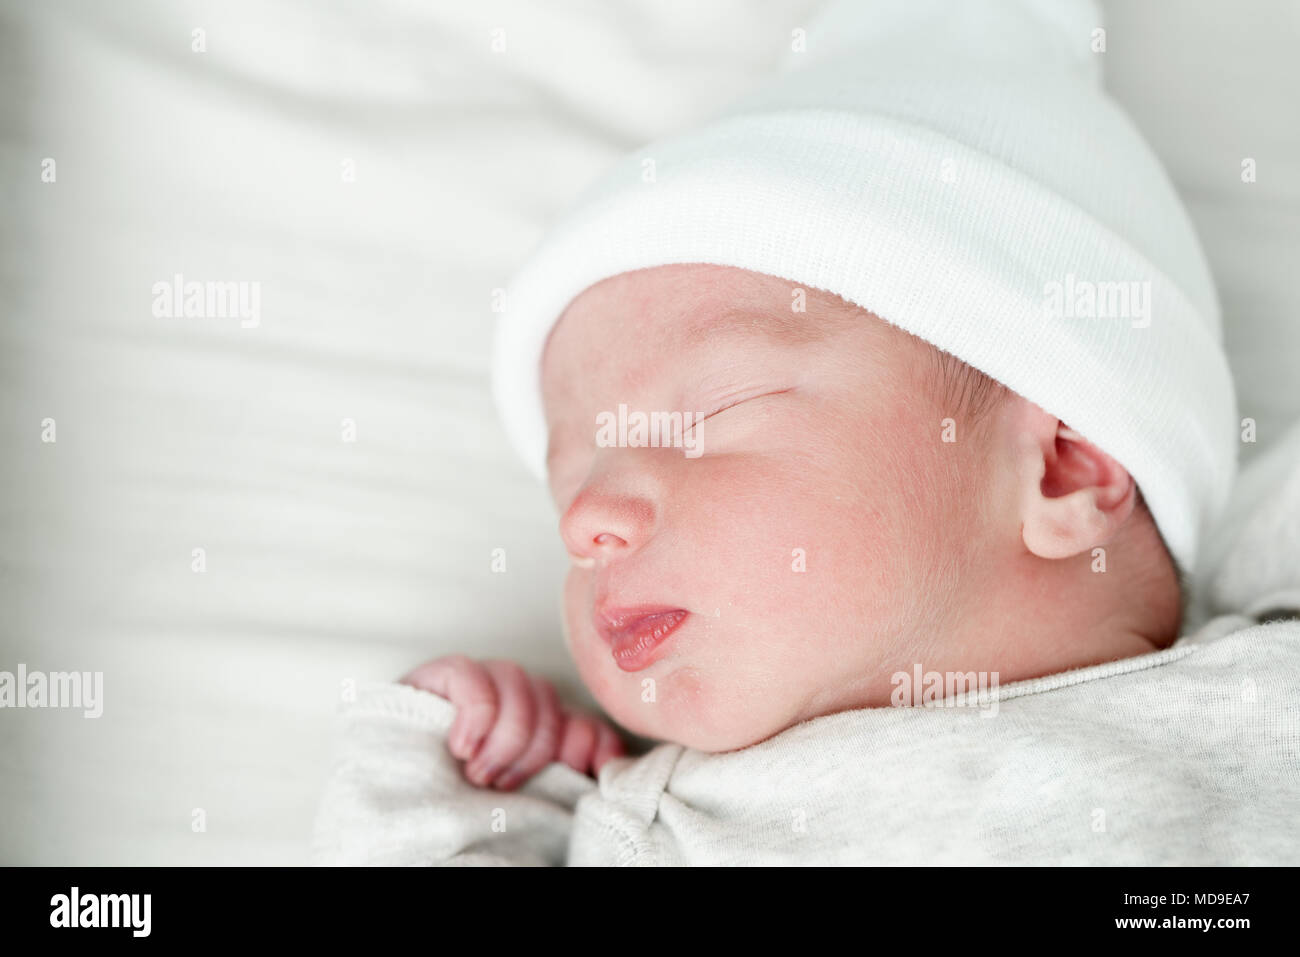 Cute baby boy sleeping on bed Banque D'Images